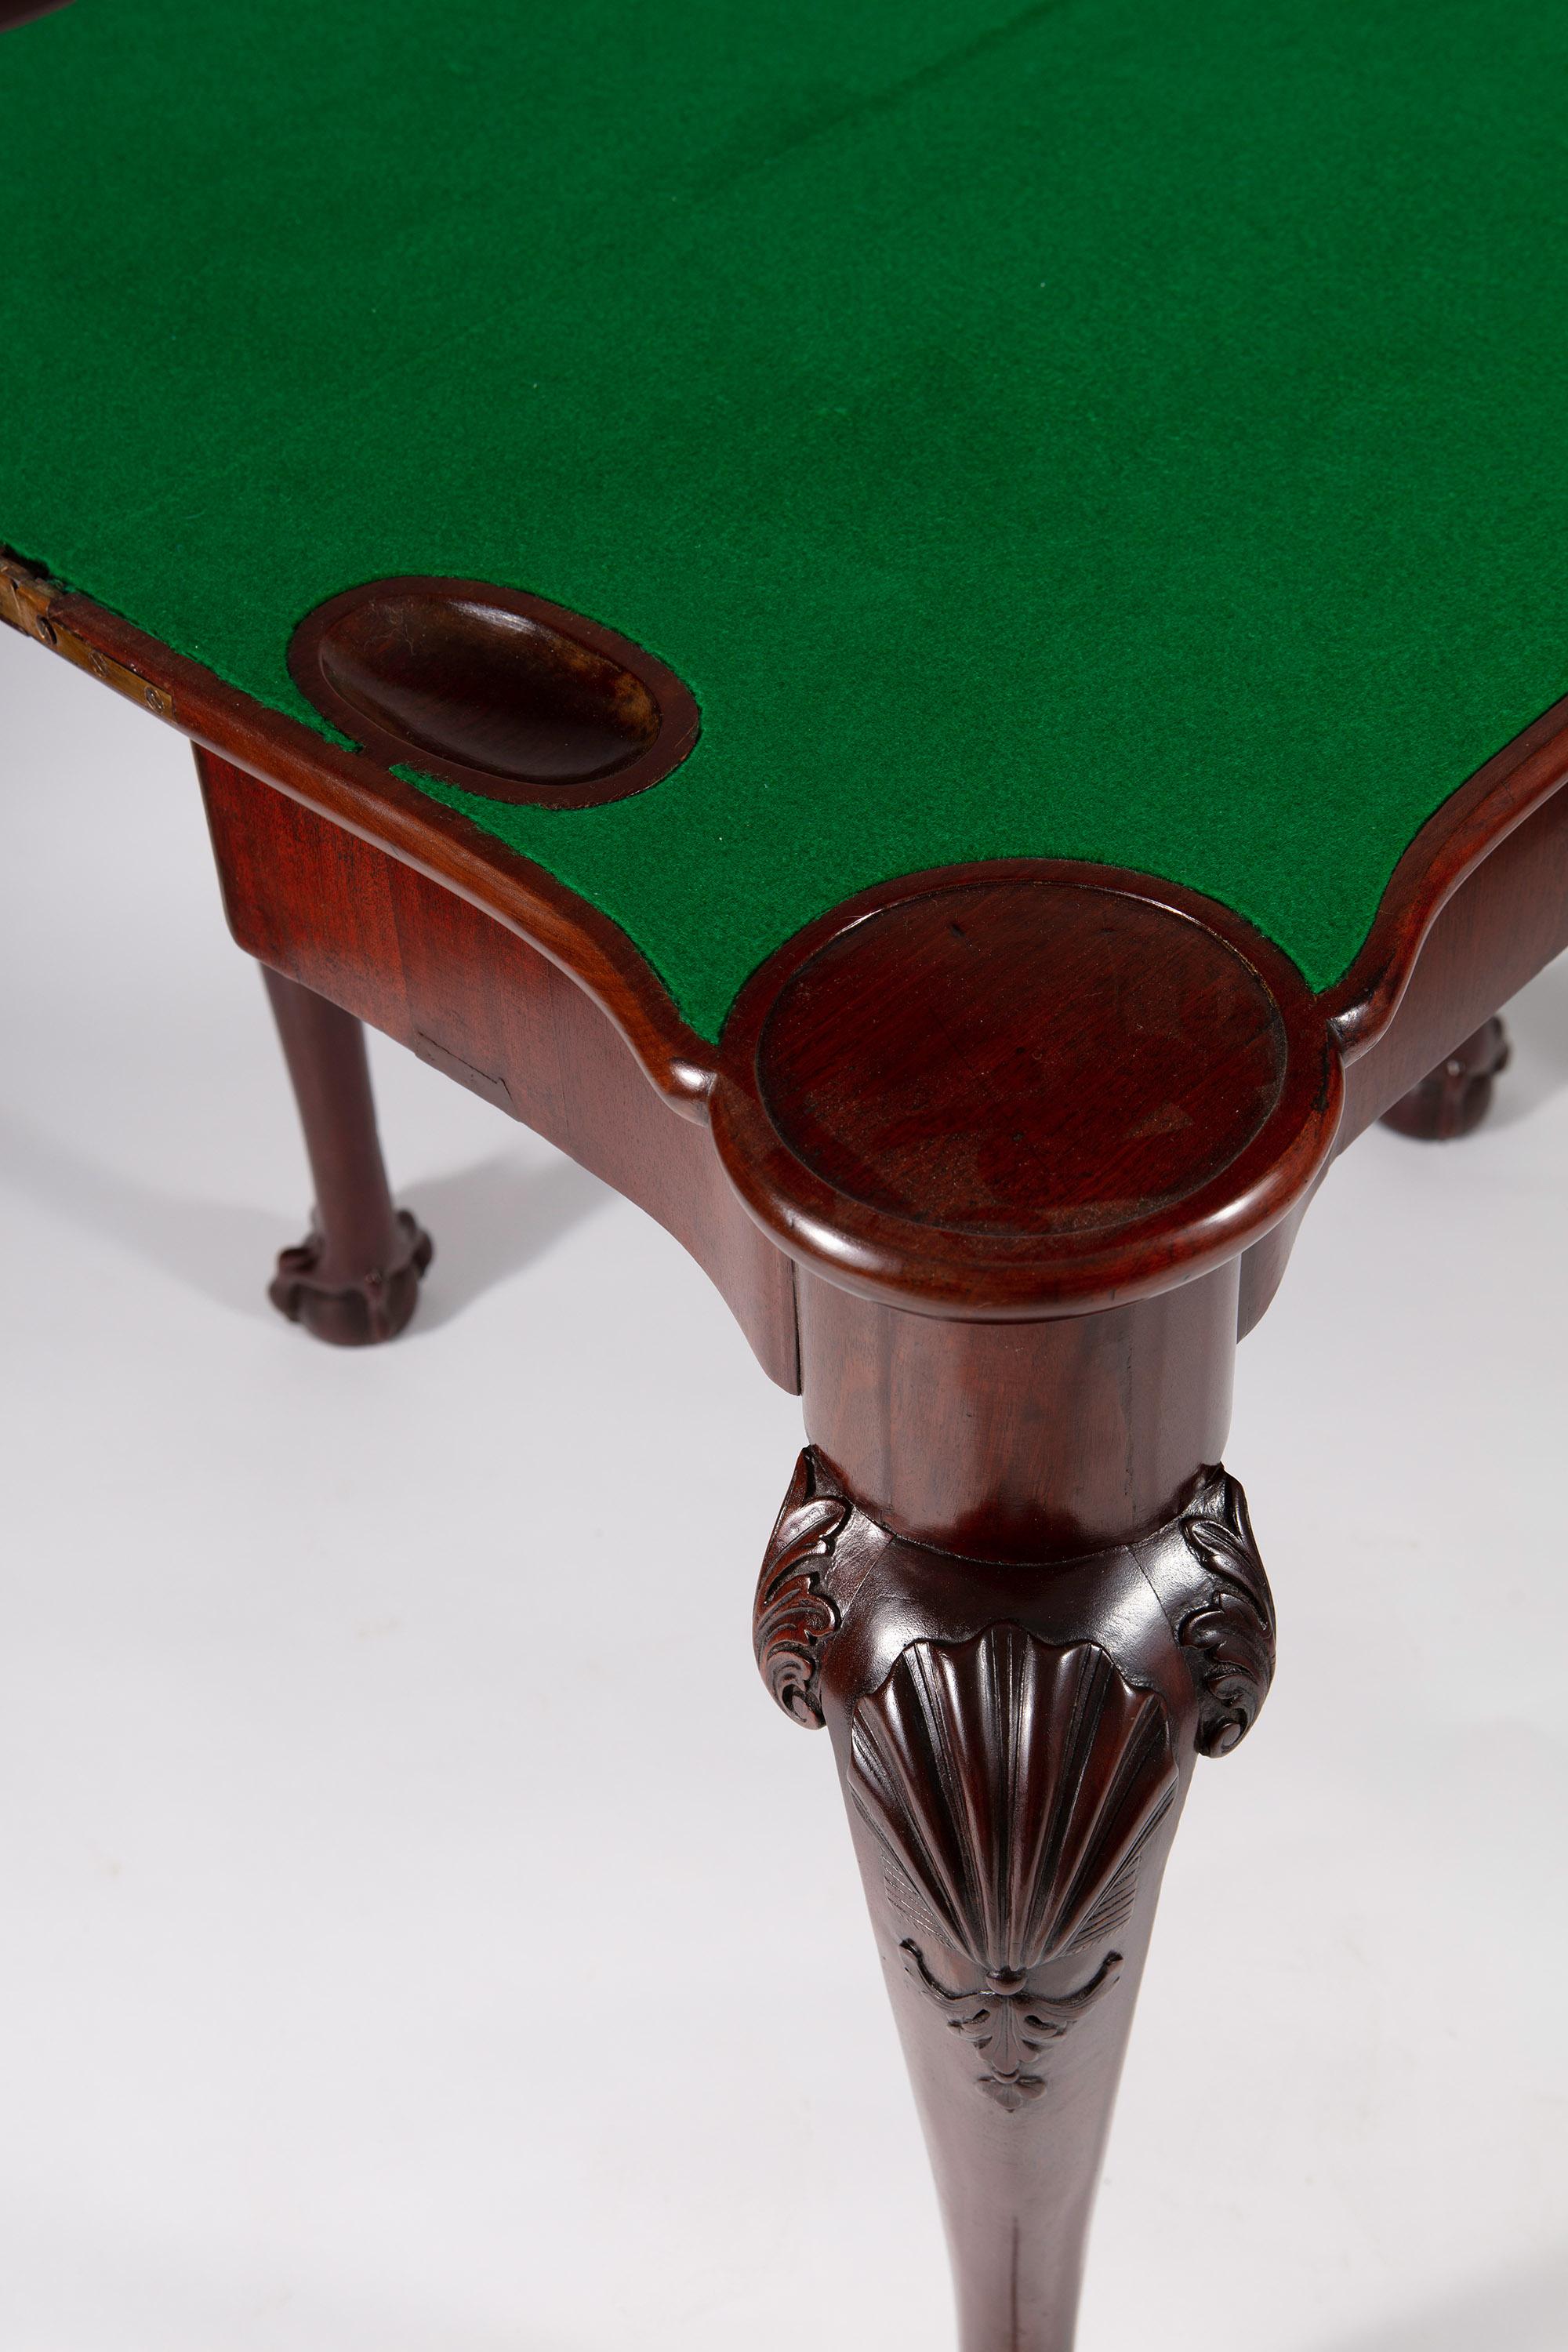 George III Chippendale Mahogany Card Table In Good Condition For Sale In London, by appointment only